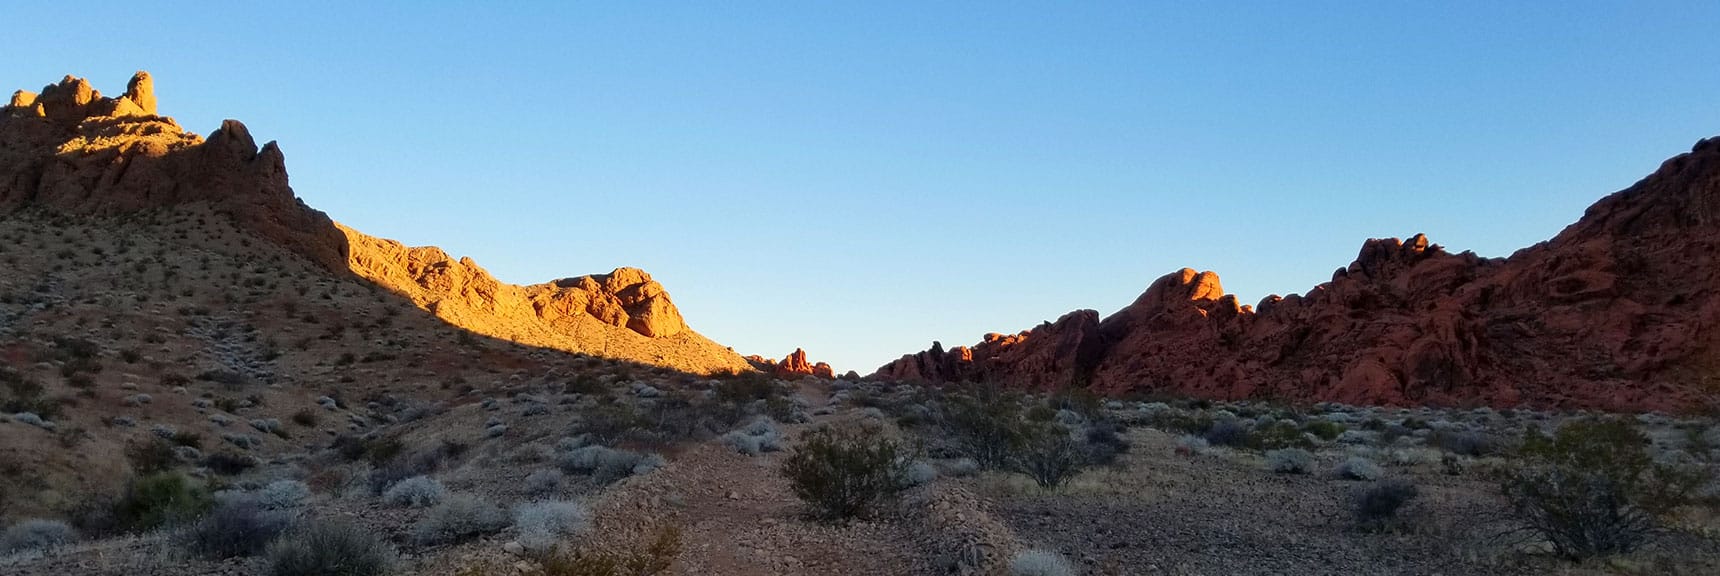 Ascending Toward the Pass for Prospect Trail in Valley of Fire State Park, Nevada